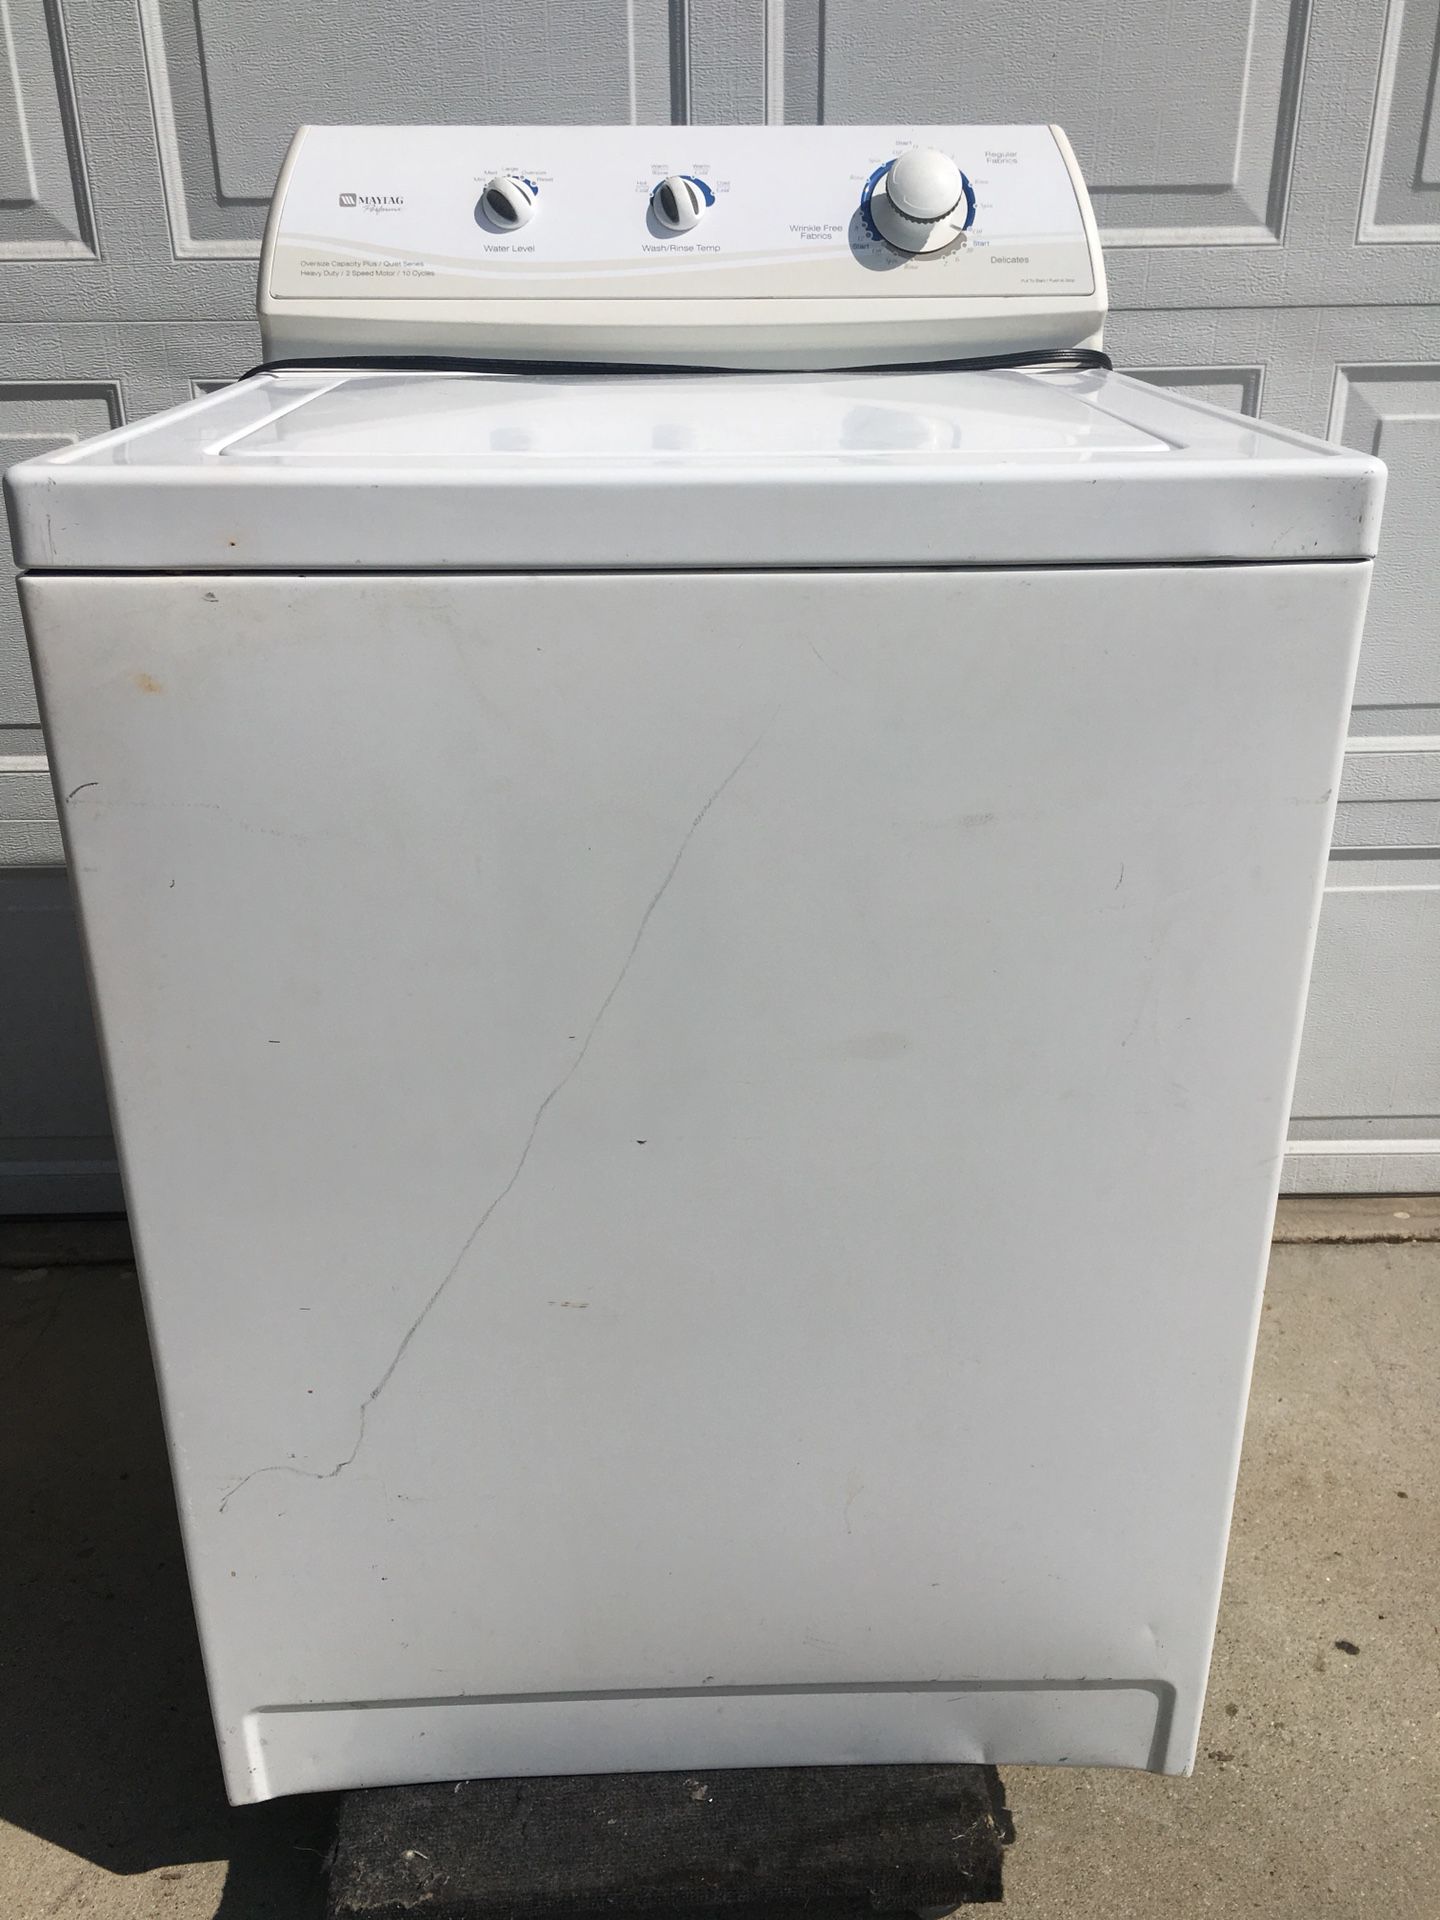 MAYTAG PERFORMA WASHER OVERSIZE CAPACITY PLUS/QUIET SERIES/HEAVY DUTY/2SPEED MOTOR/10 CYCLES